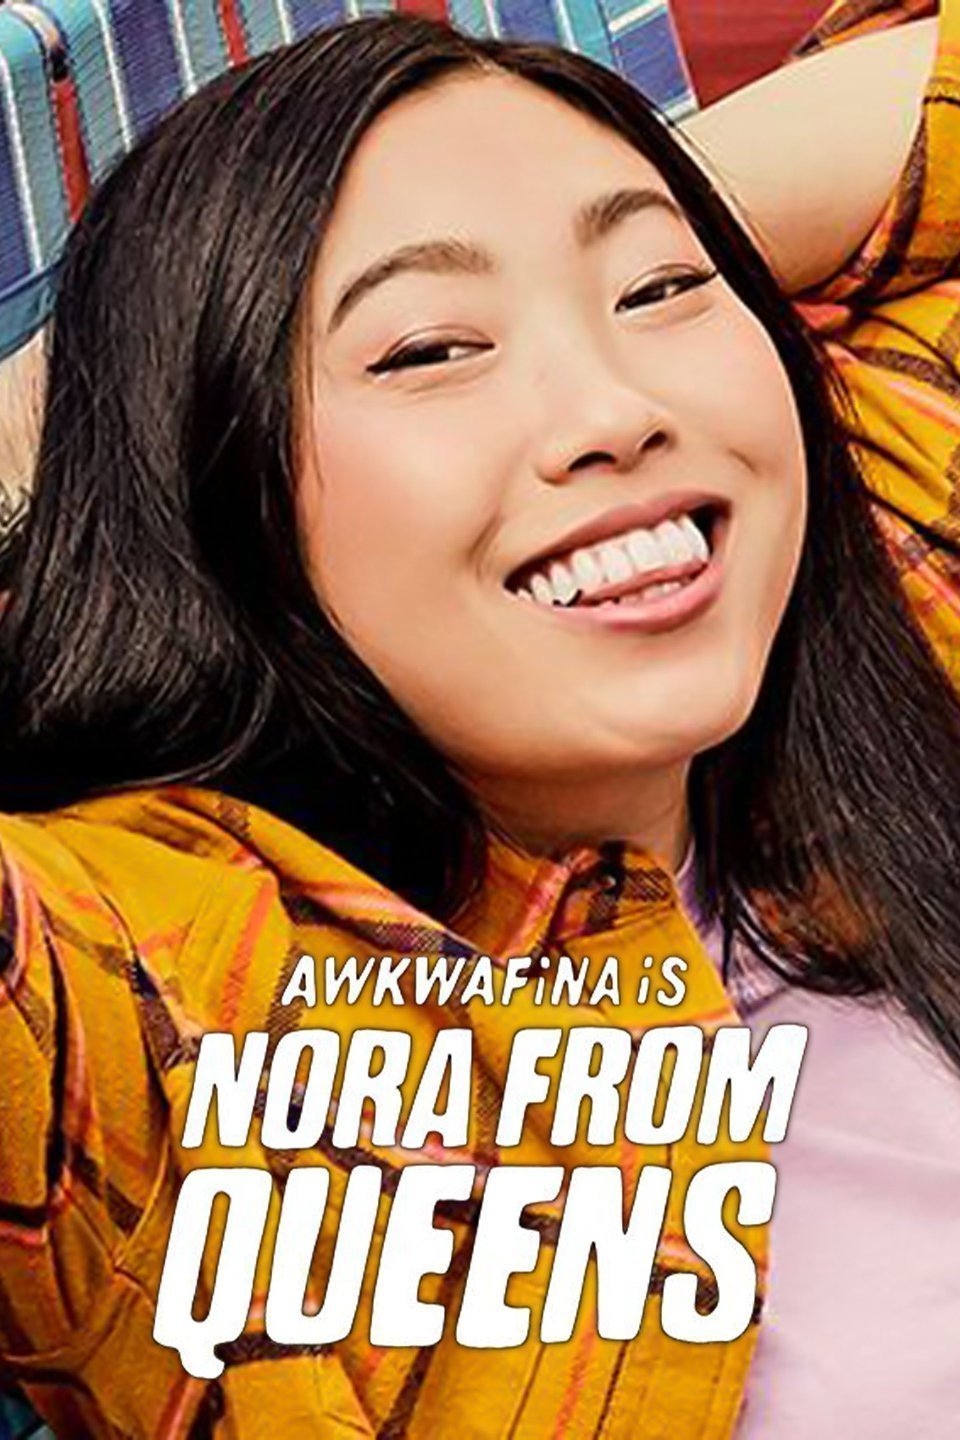  poster of the movie Awkwafina Is Nora from Queens